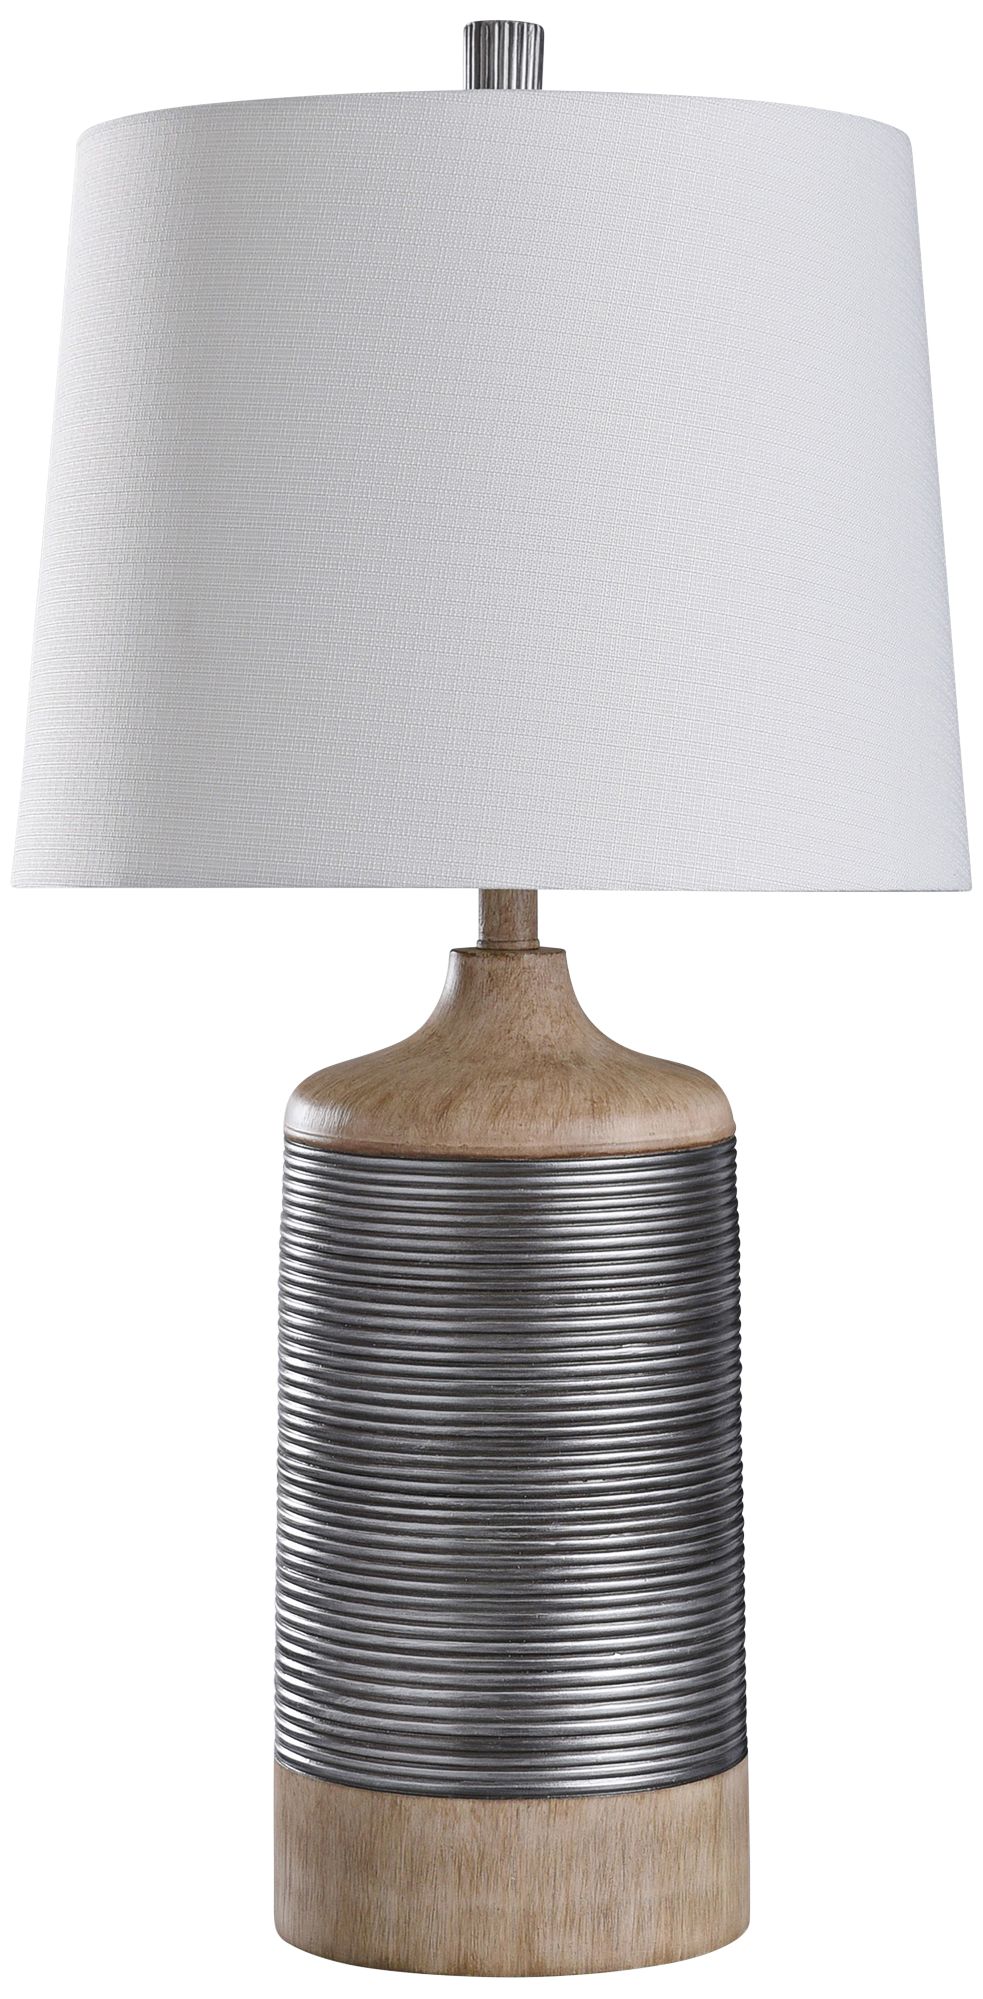 Haverhill Light Tan Wood and Silver Cylindrical Table Lamp